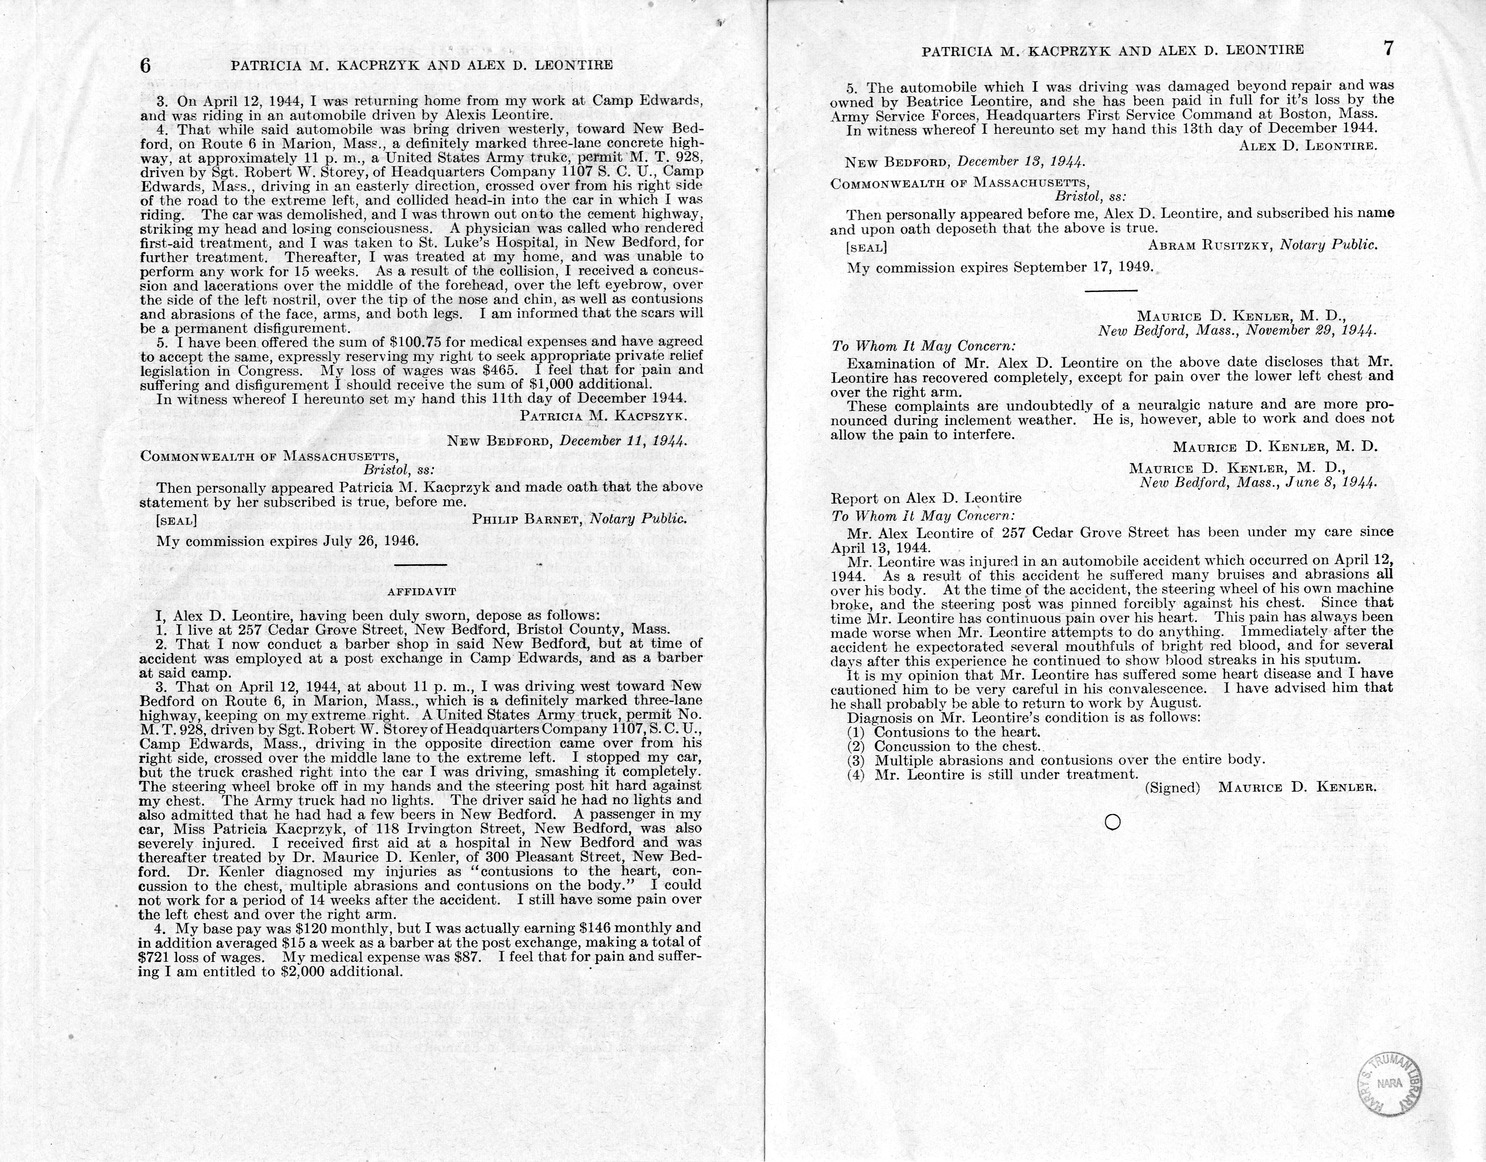 Memorandum from Frederick J. Bailey to M. C. Latta, H.R. 2511, For the Relief of Patricia M. Kacprzyk and Alex D. Leontire, with Attachments